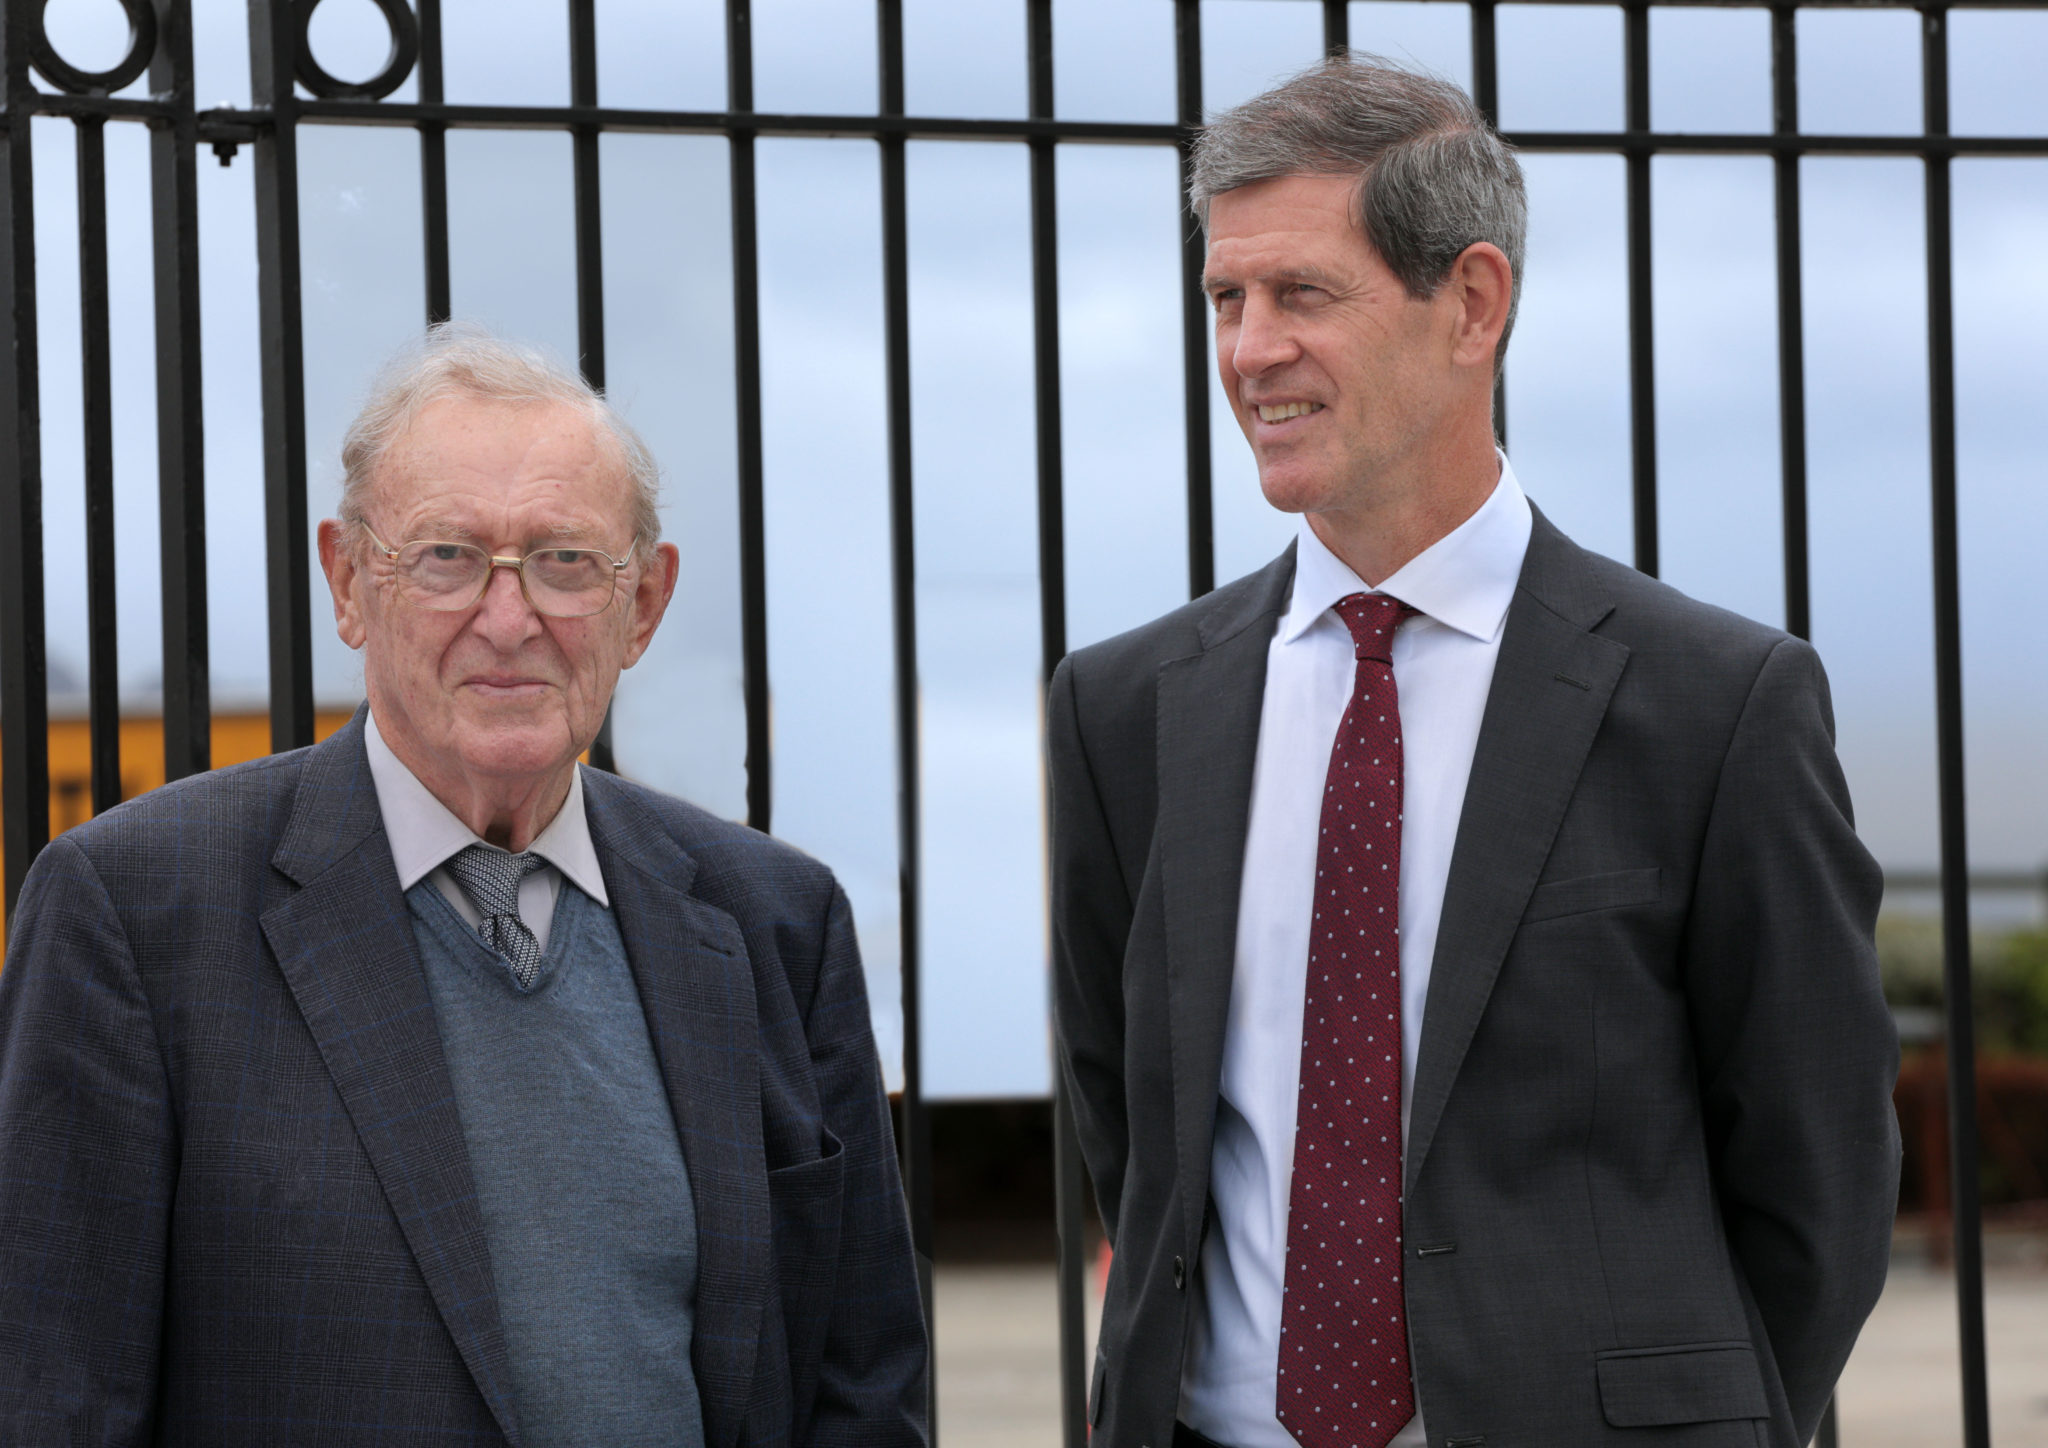 The late Ivo O’Sullivan Snr with his son and fellow Director Ivo O’Sullivan at the official opening of the new main entrance, Friday, August 19th, 2022. Photo: Valerie O’ Sullivan.